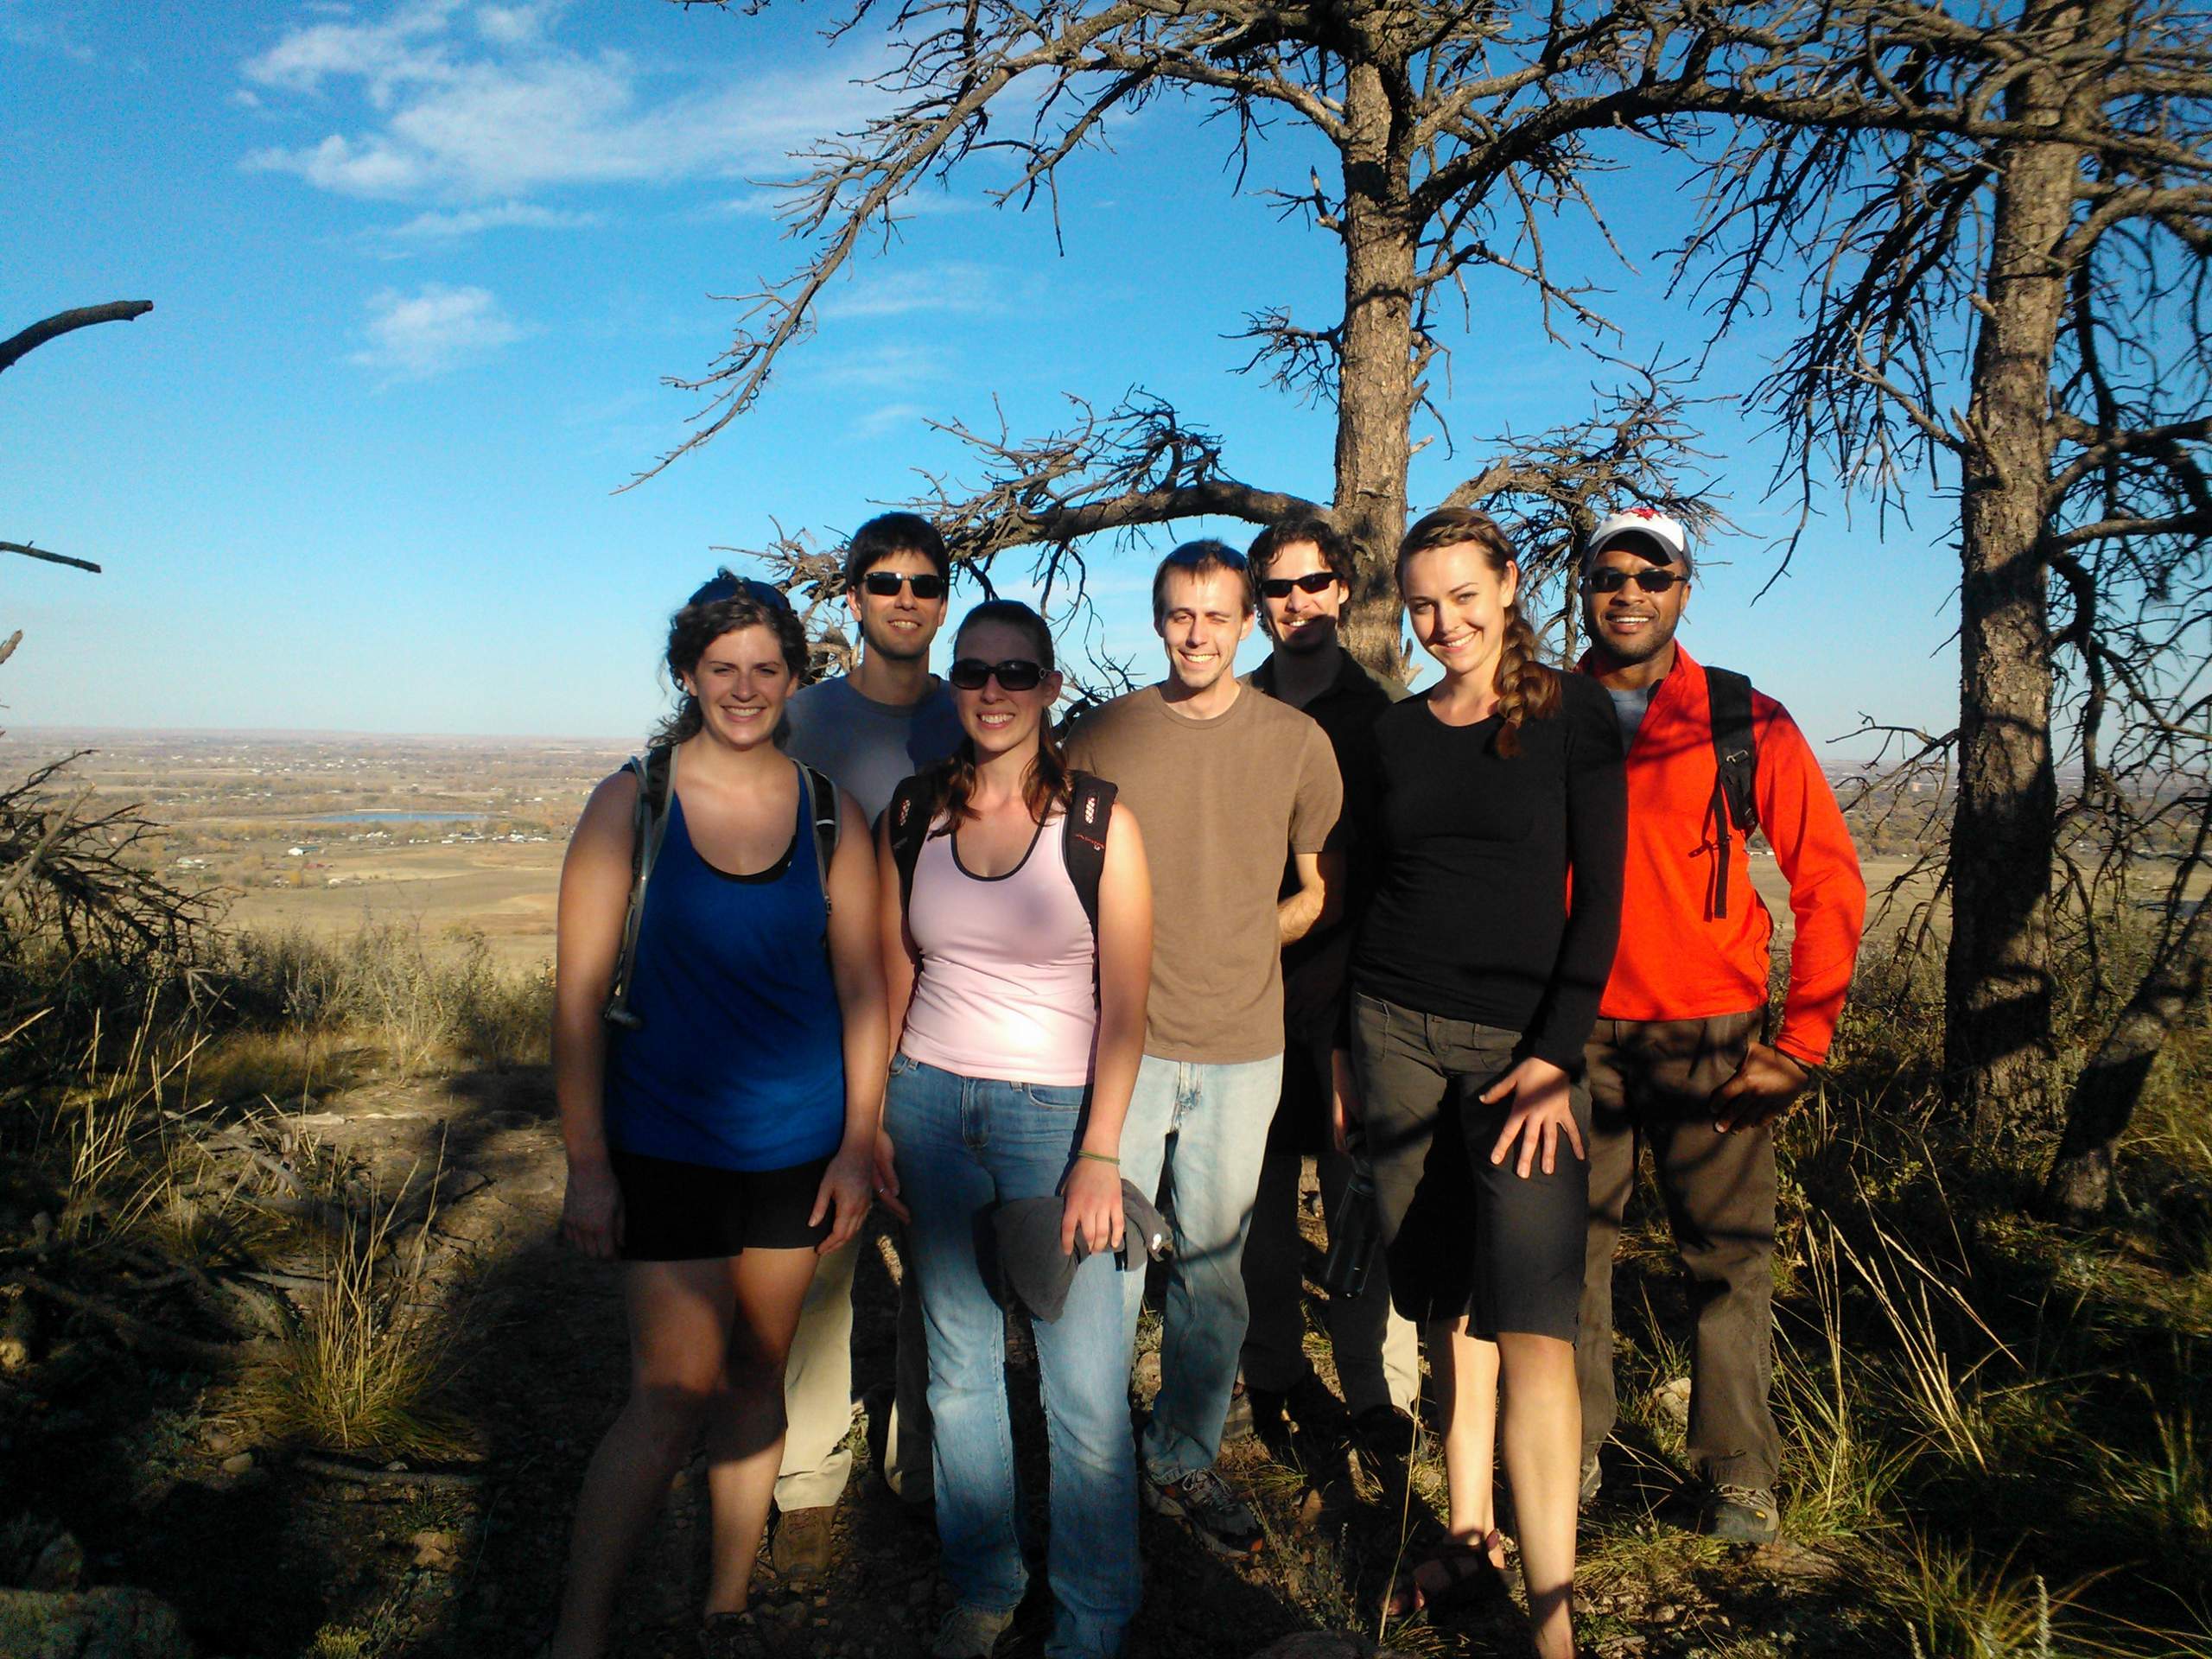 Our second hike this year at Reservoir Ridge. Ali, Mauro, Colleen, Ryan, Hector, Katherine and Jason.